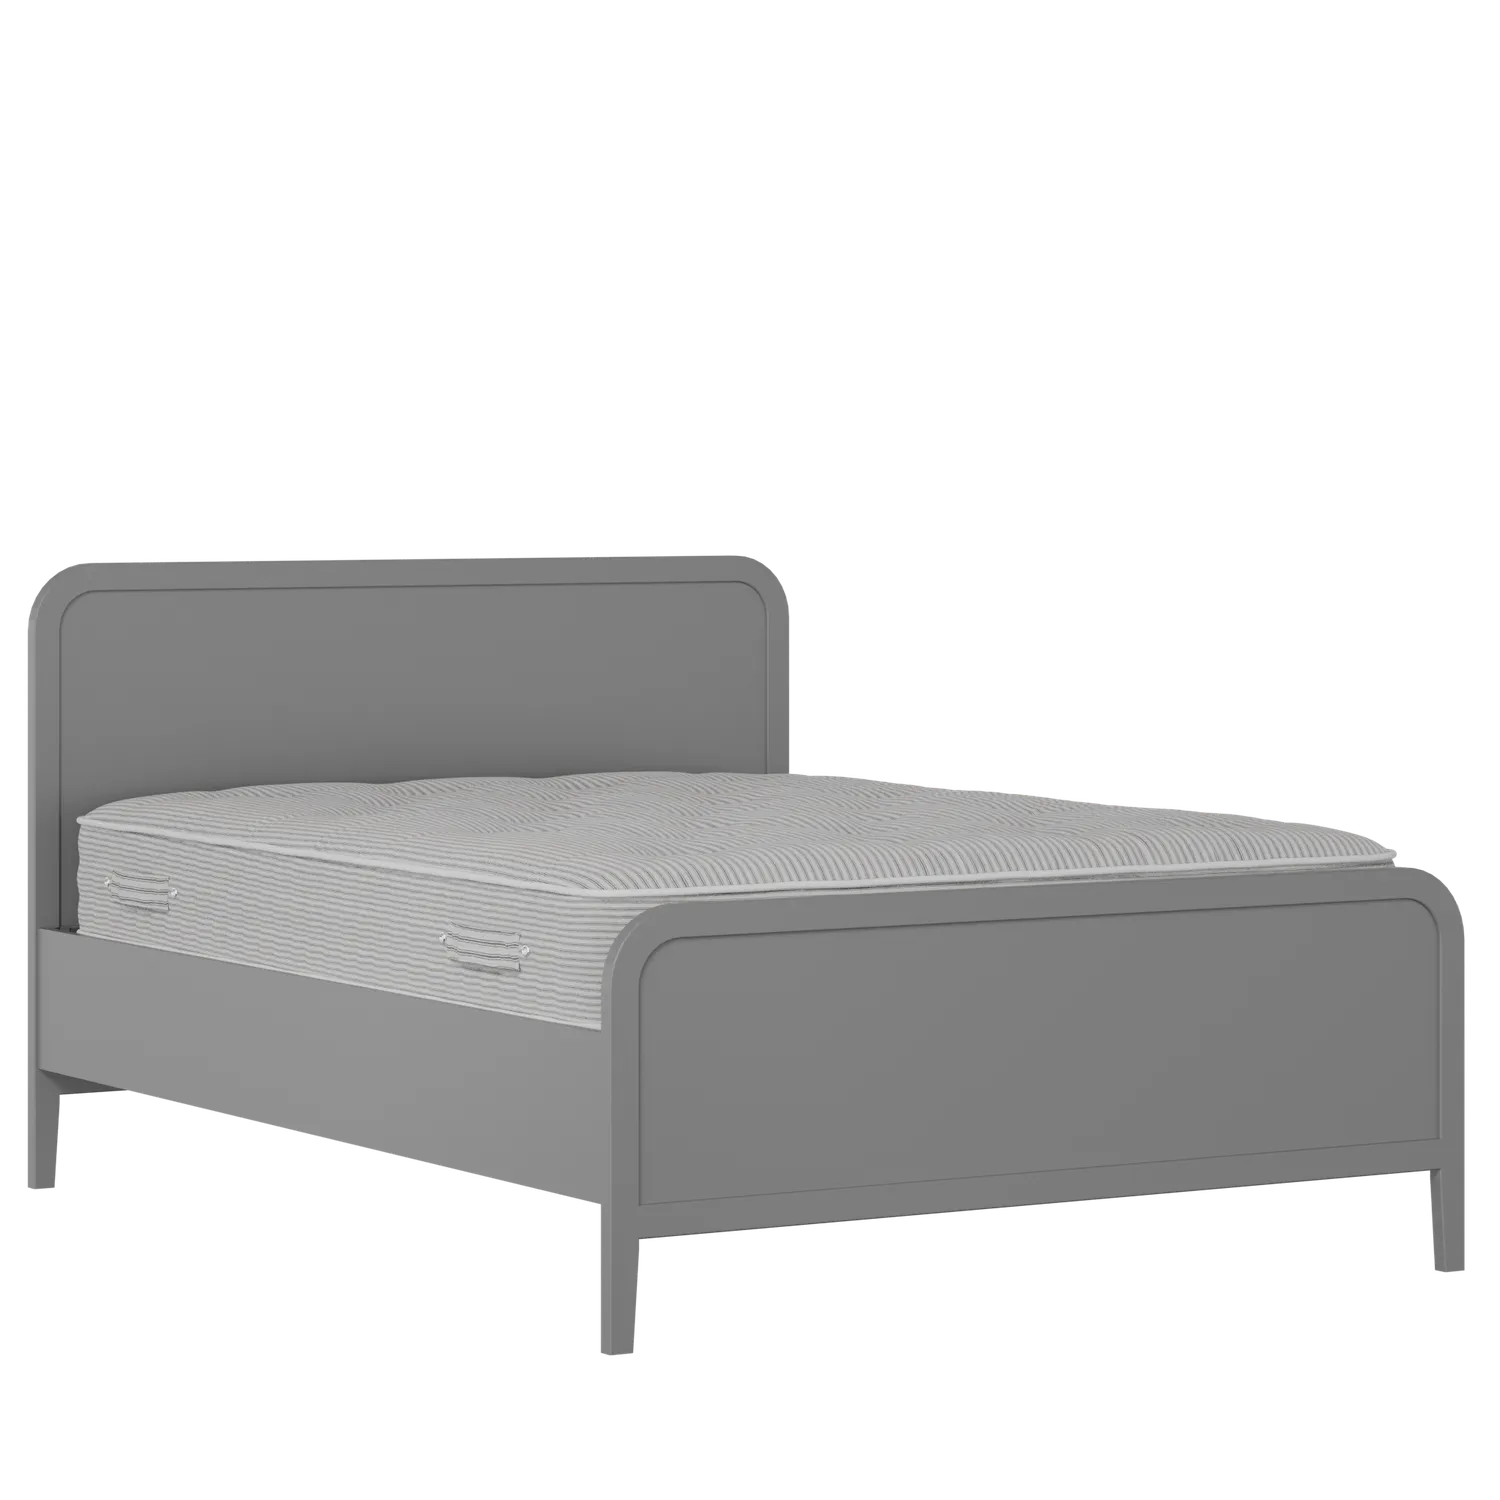 Keats Painted painted wood bed in grey with Juno mattress